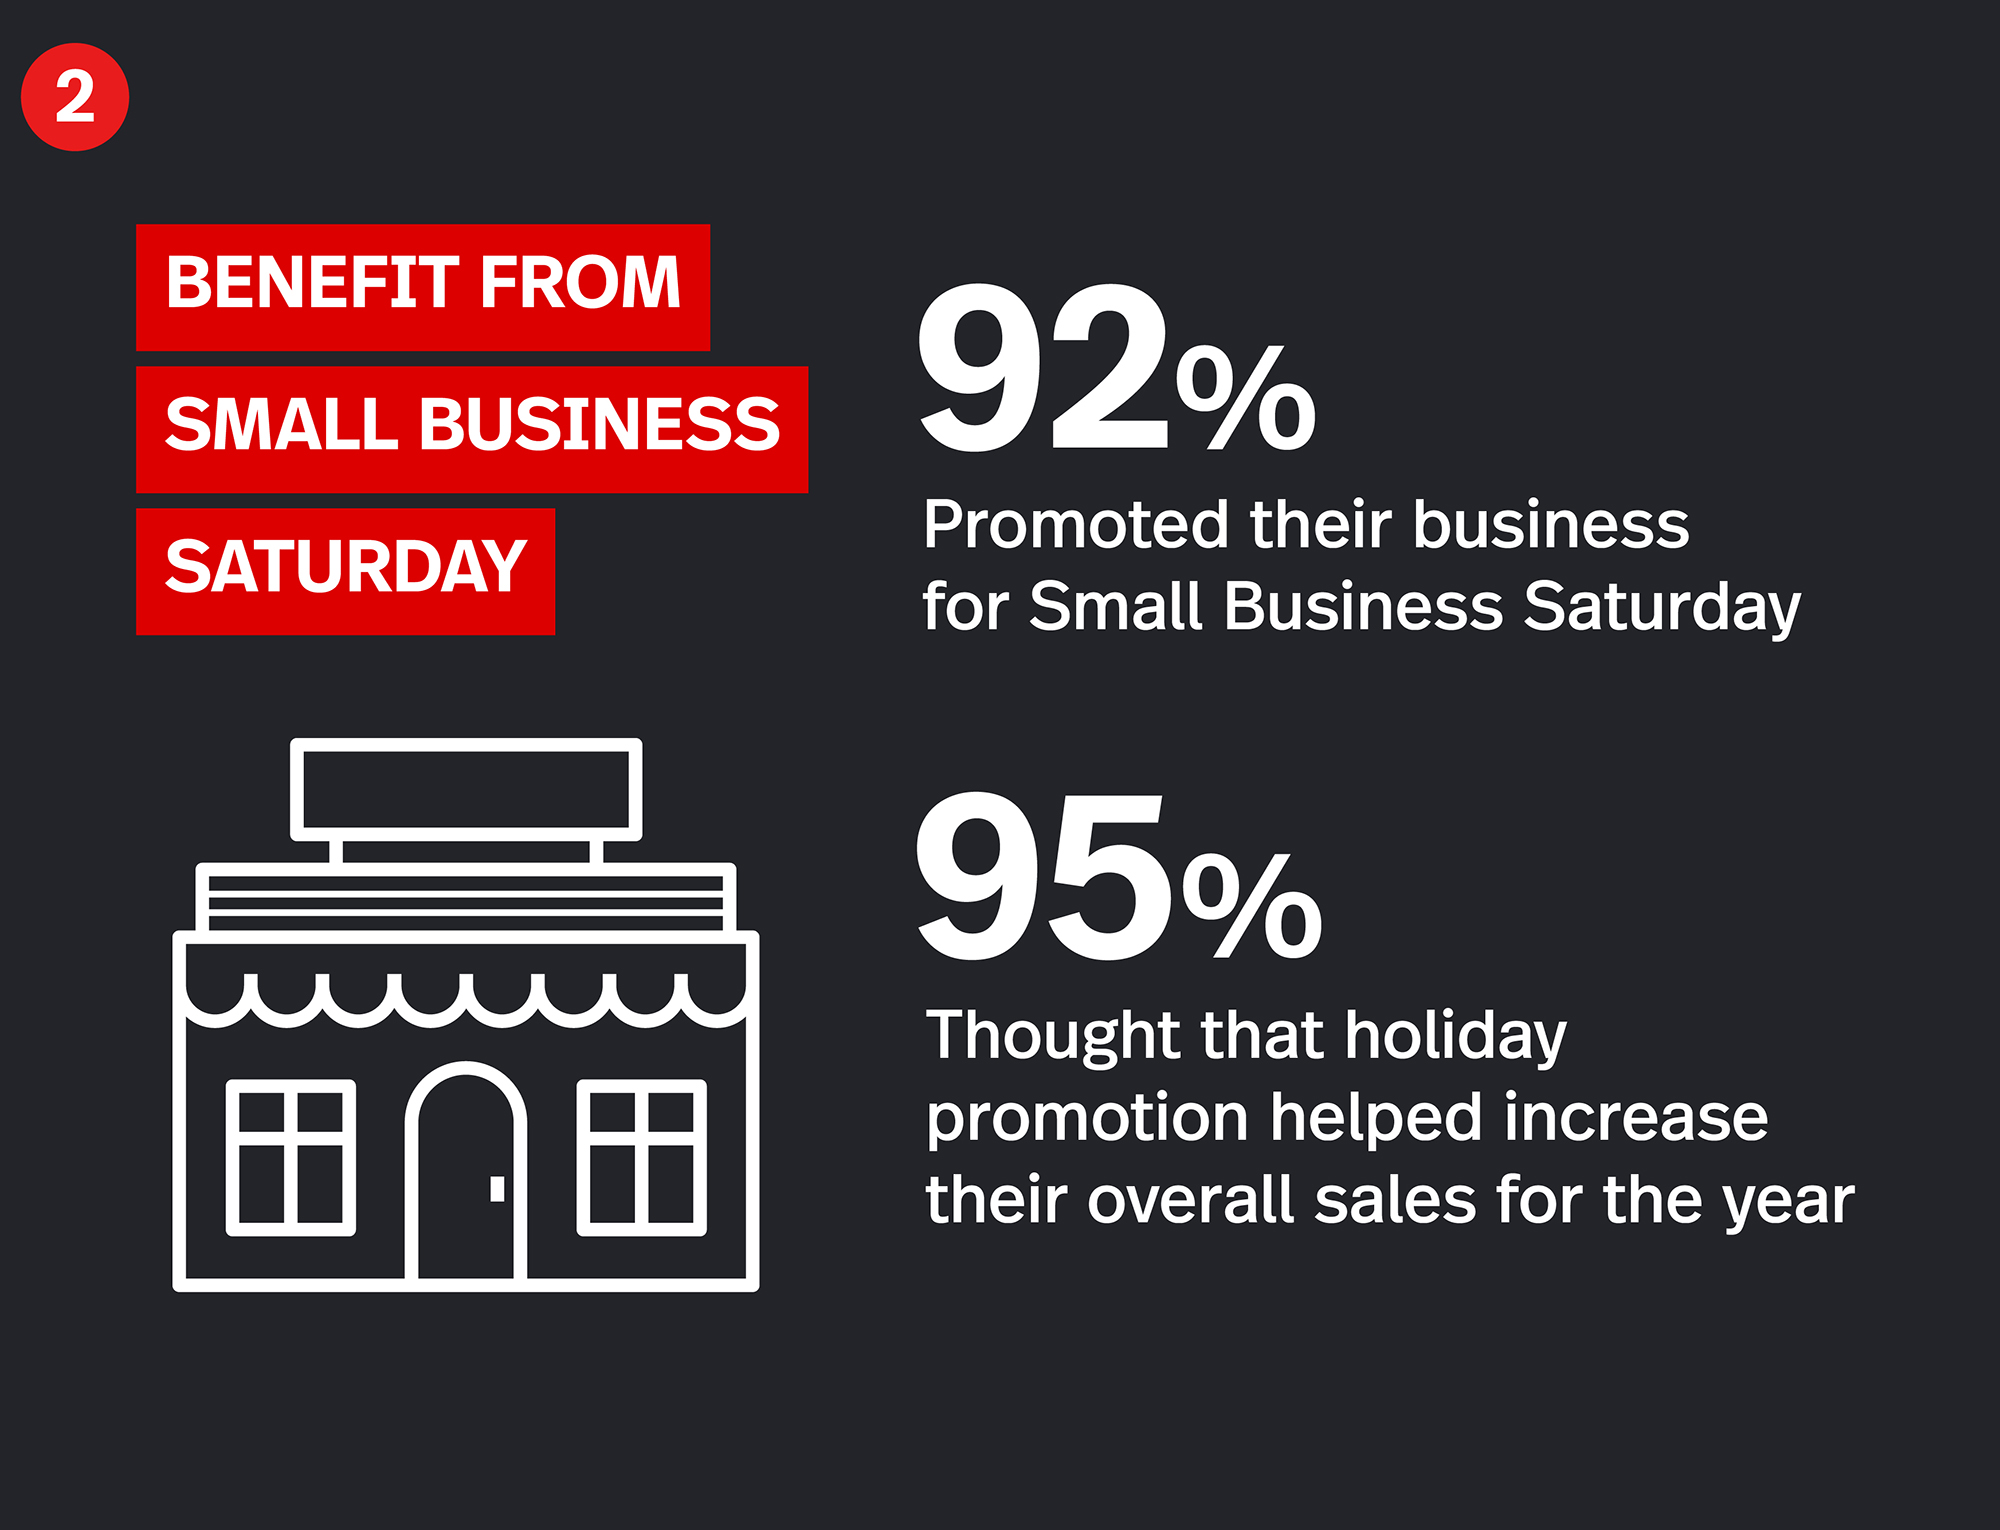 illustration of the top benefits from Small Business Saturday. 